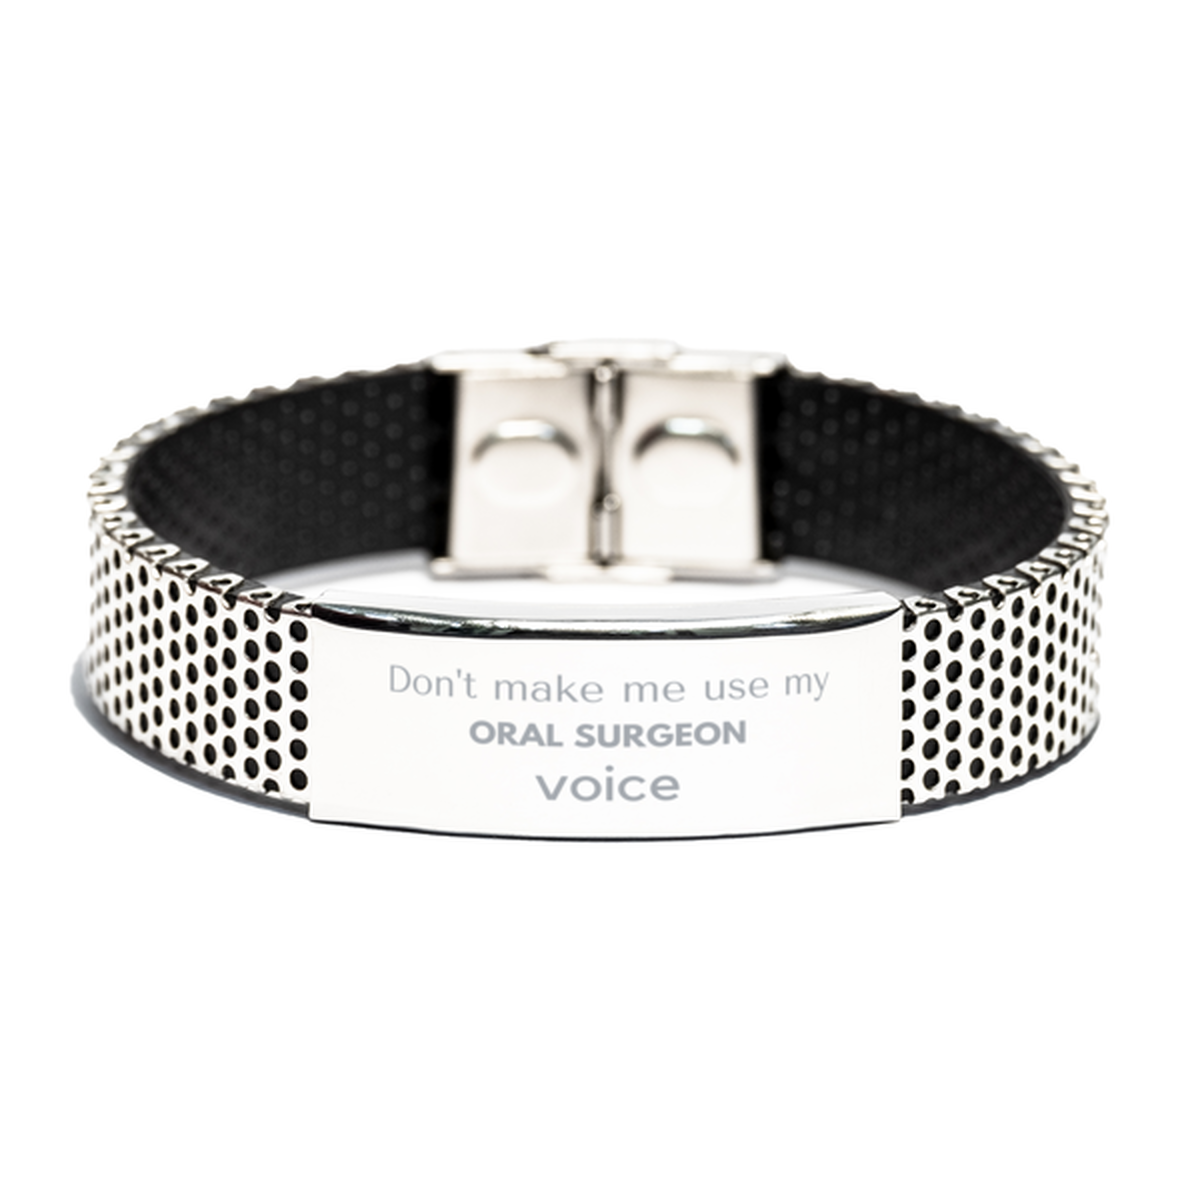 Don't make me use my Oral Surgeon voice, Sarcasm Oral Surgeon Gifts, Christmas Oral Surgeon Stainless Steel Bracelet Birthday Unique Gifts For Oral Surgeon Coworkers, Men, Women, Colleague, Friends